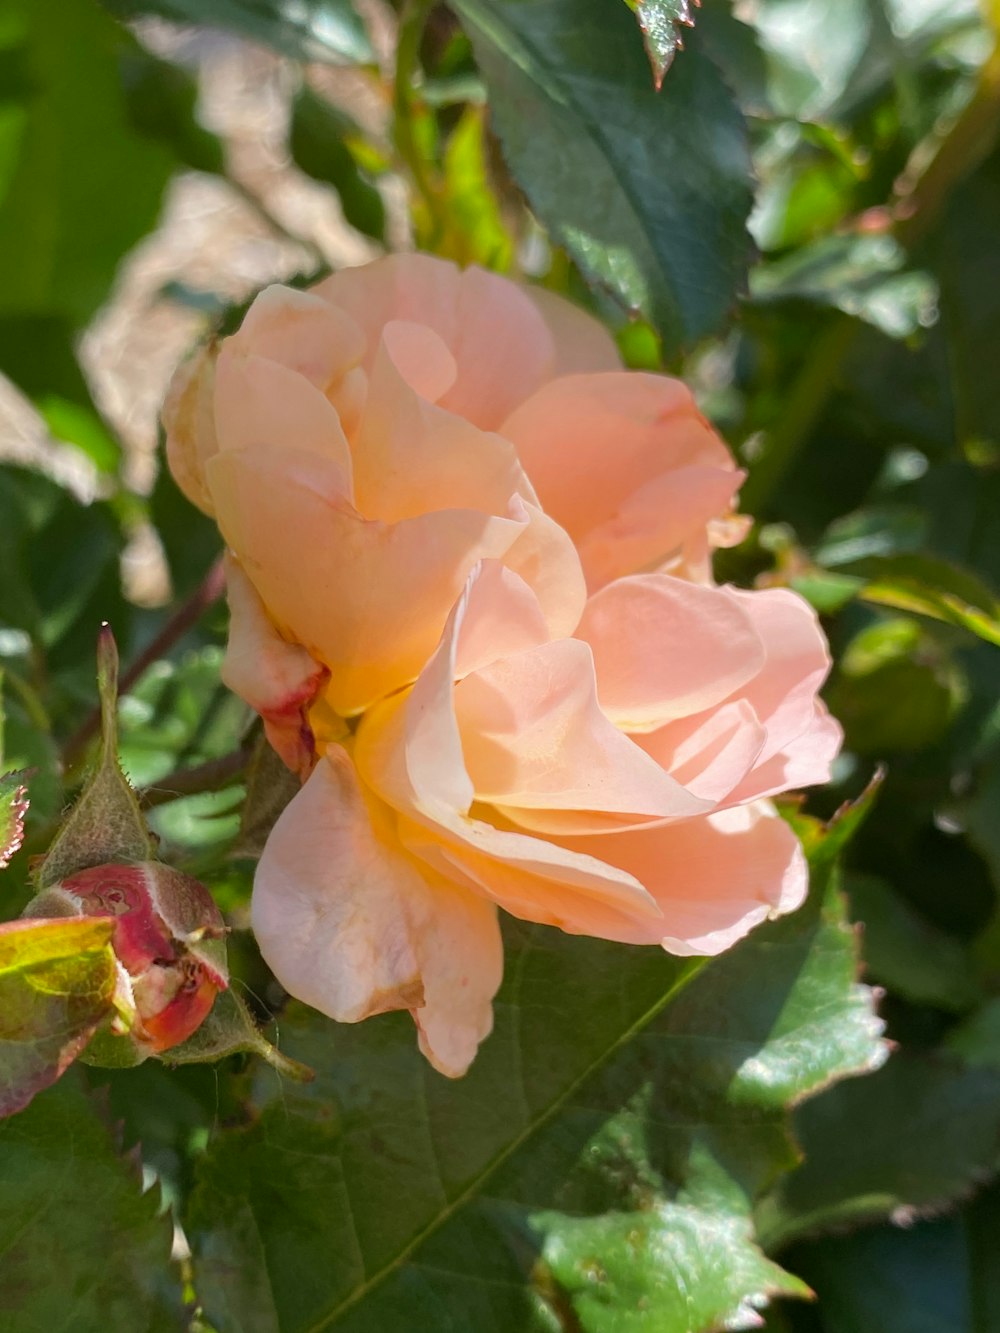 a pink rose is blooming in a garden